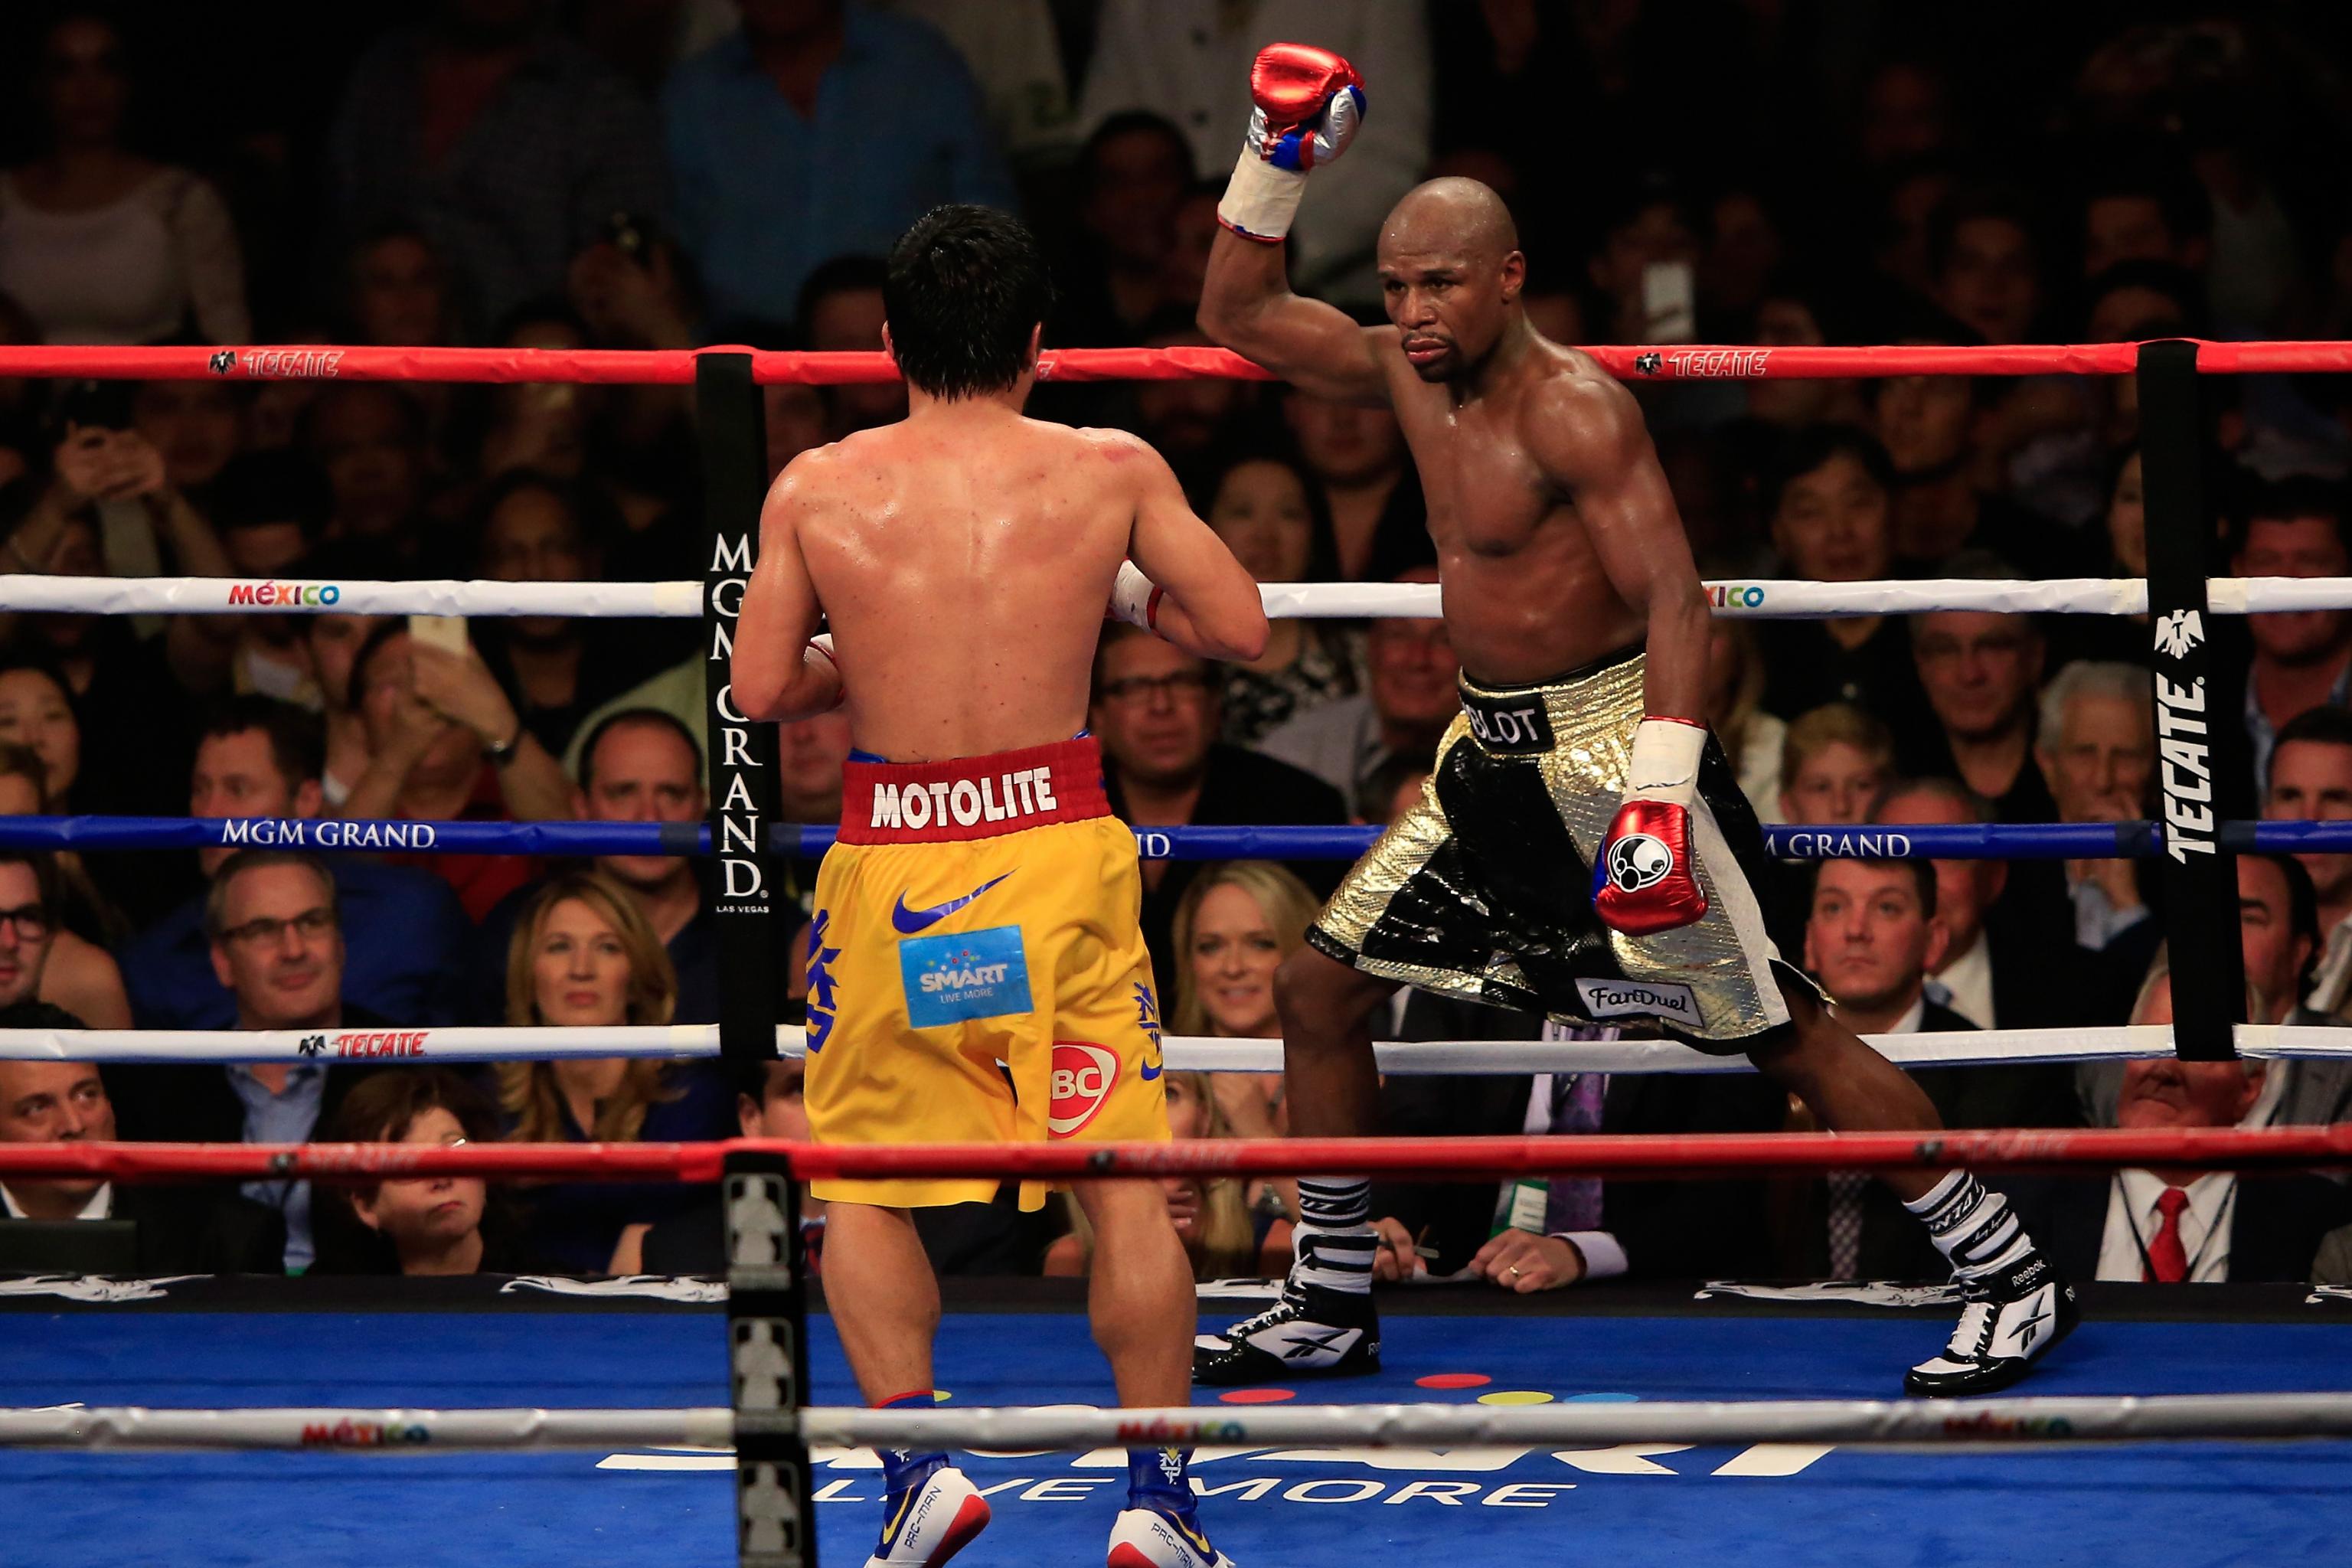 Mayweather-Pacquiao Rematch Nearly Impossible